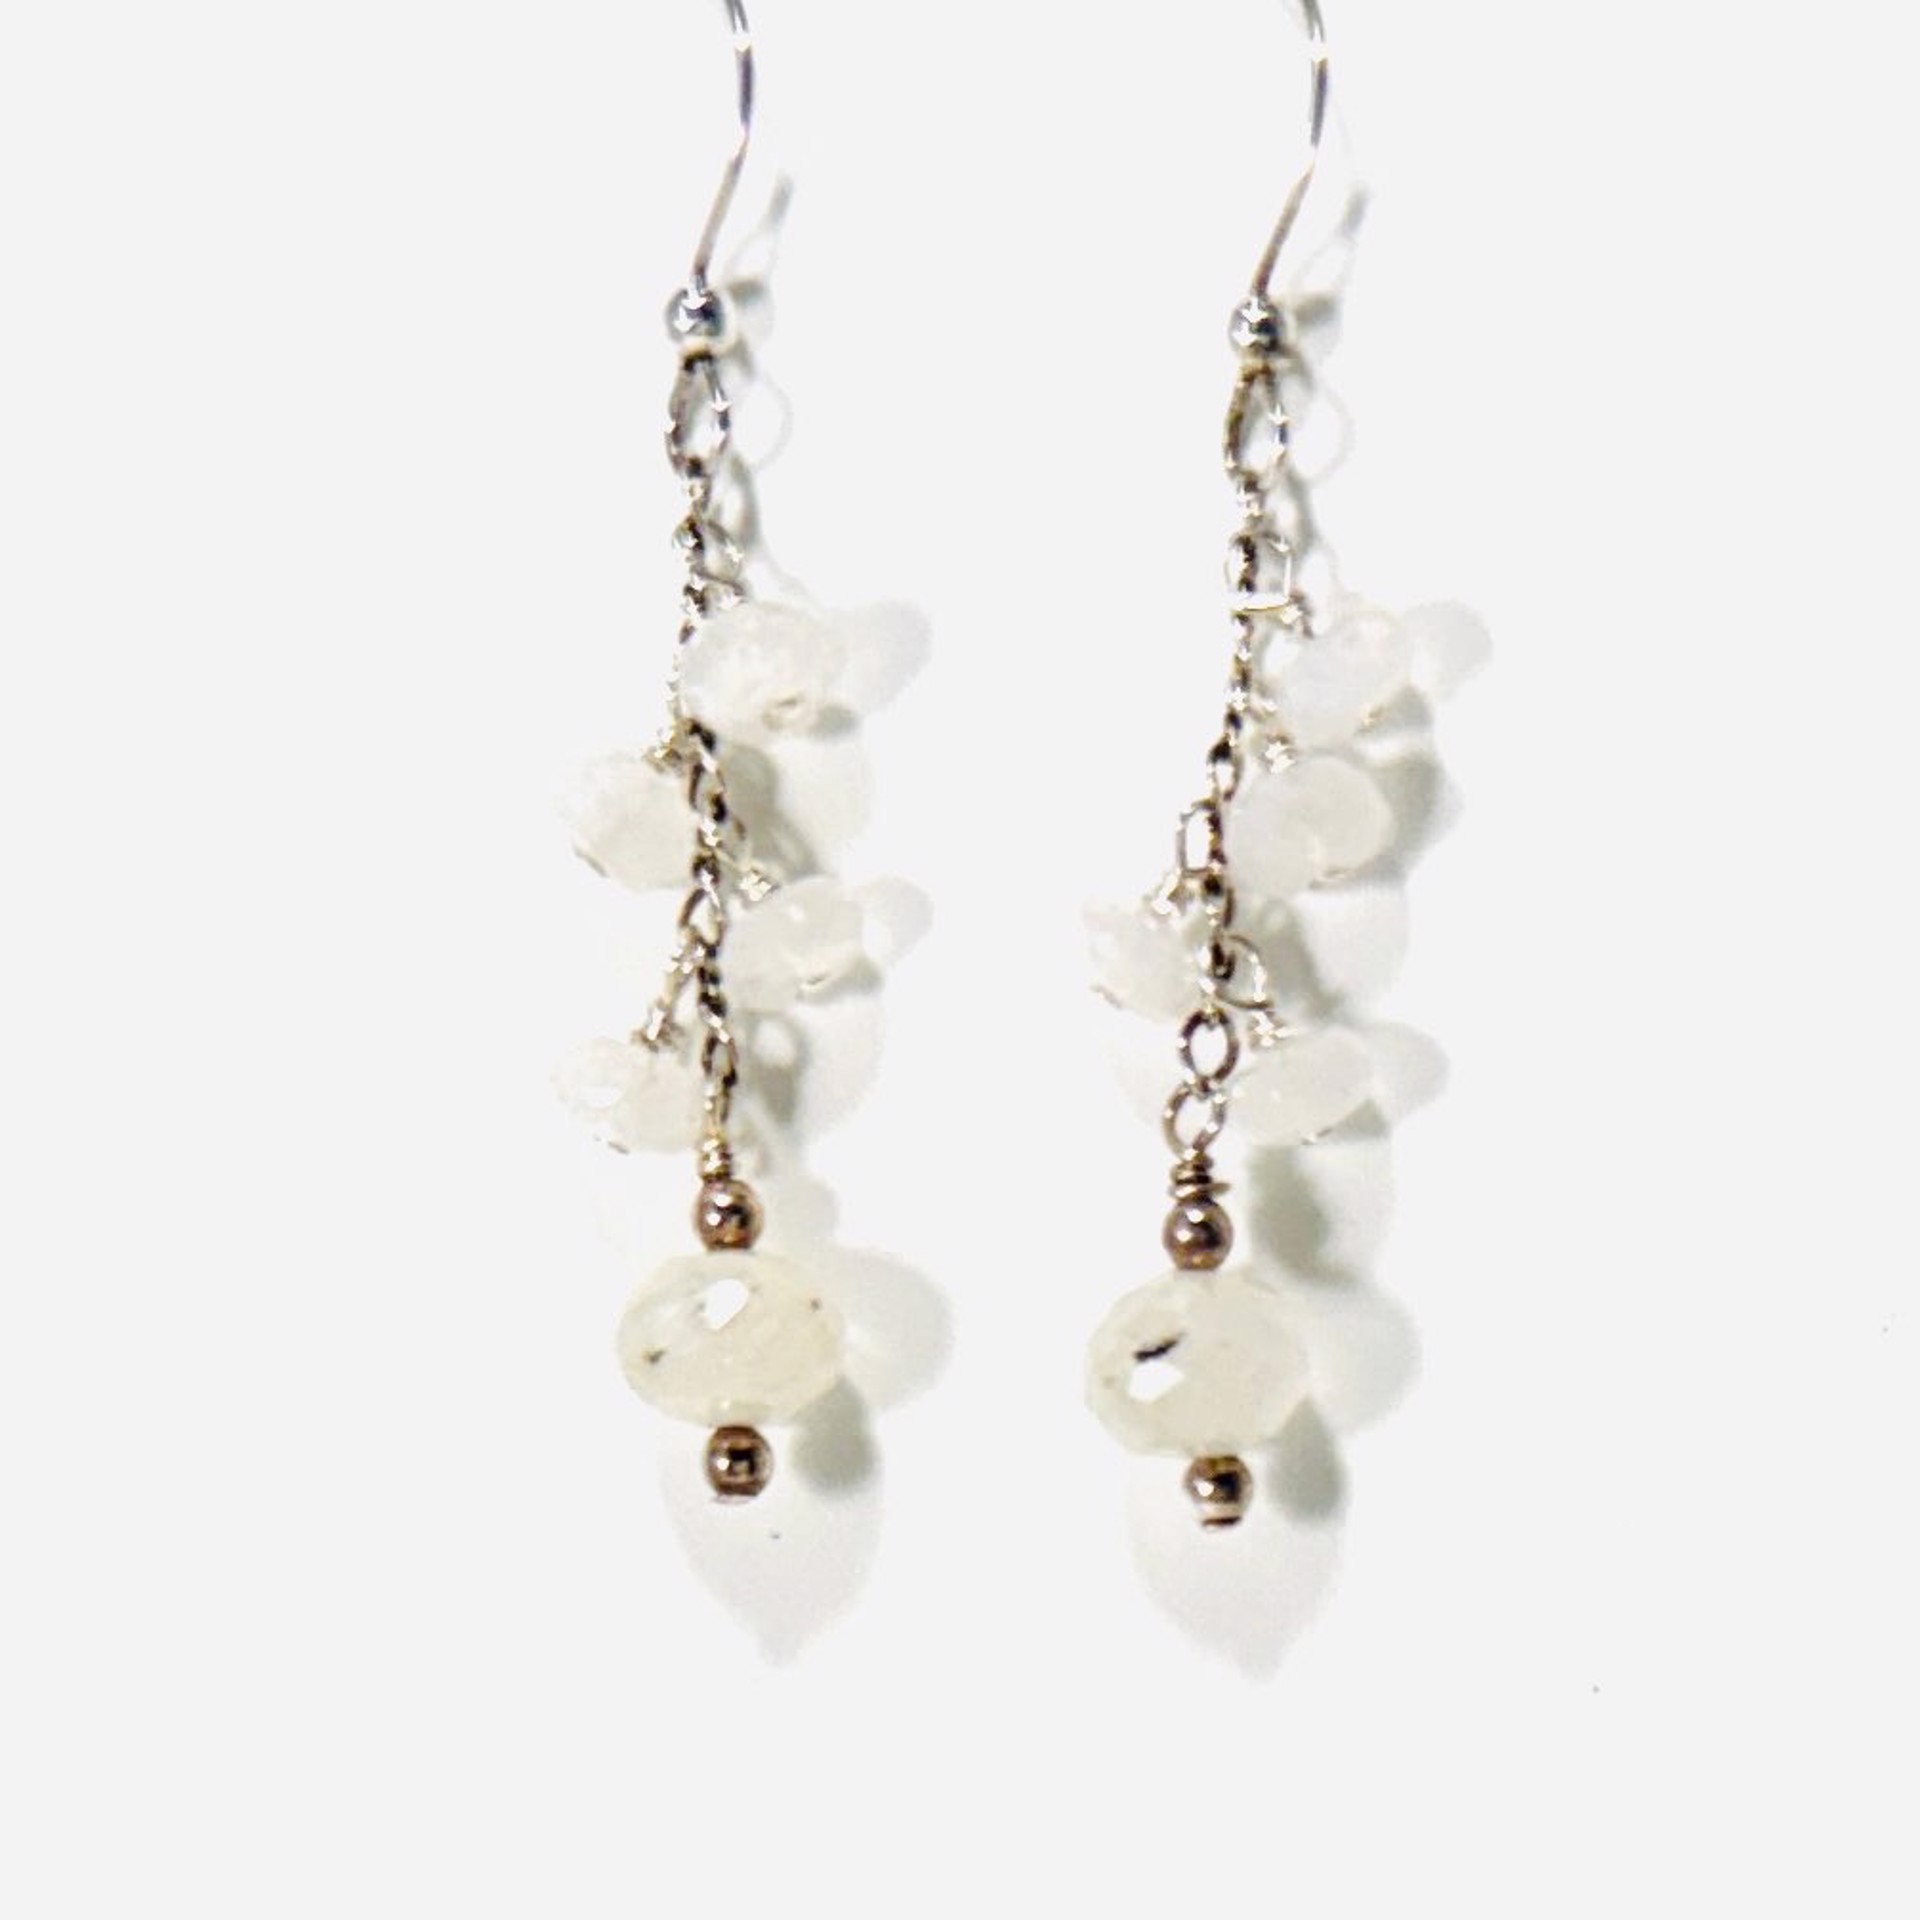 Moonstone Drop Silver Chain Earrings LR24-11 by Legare Riano